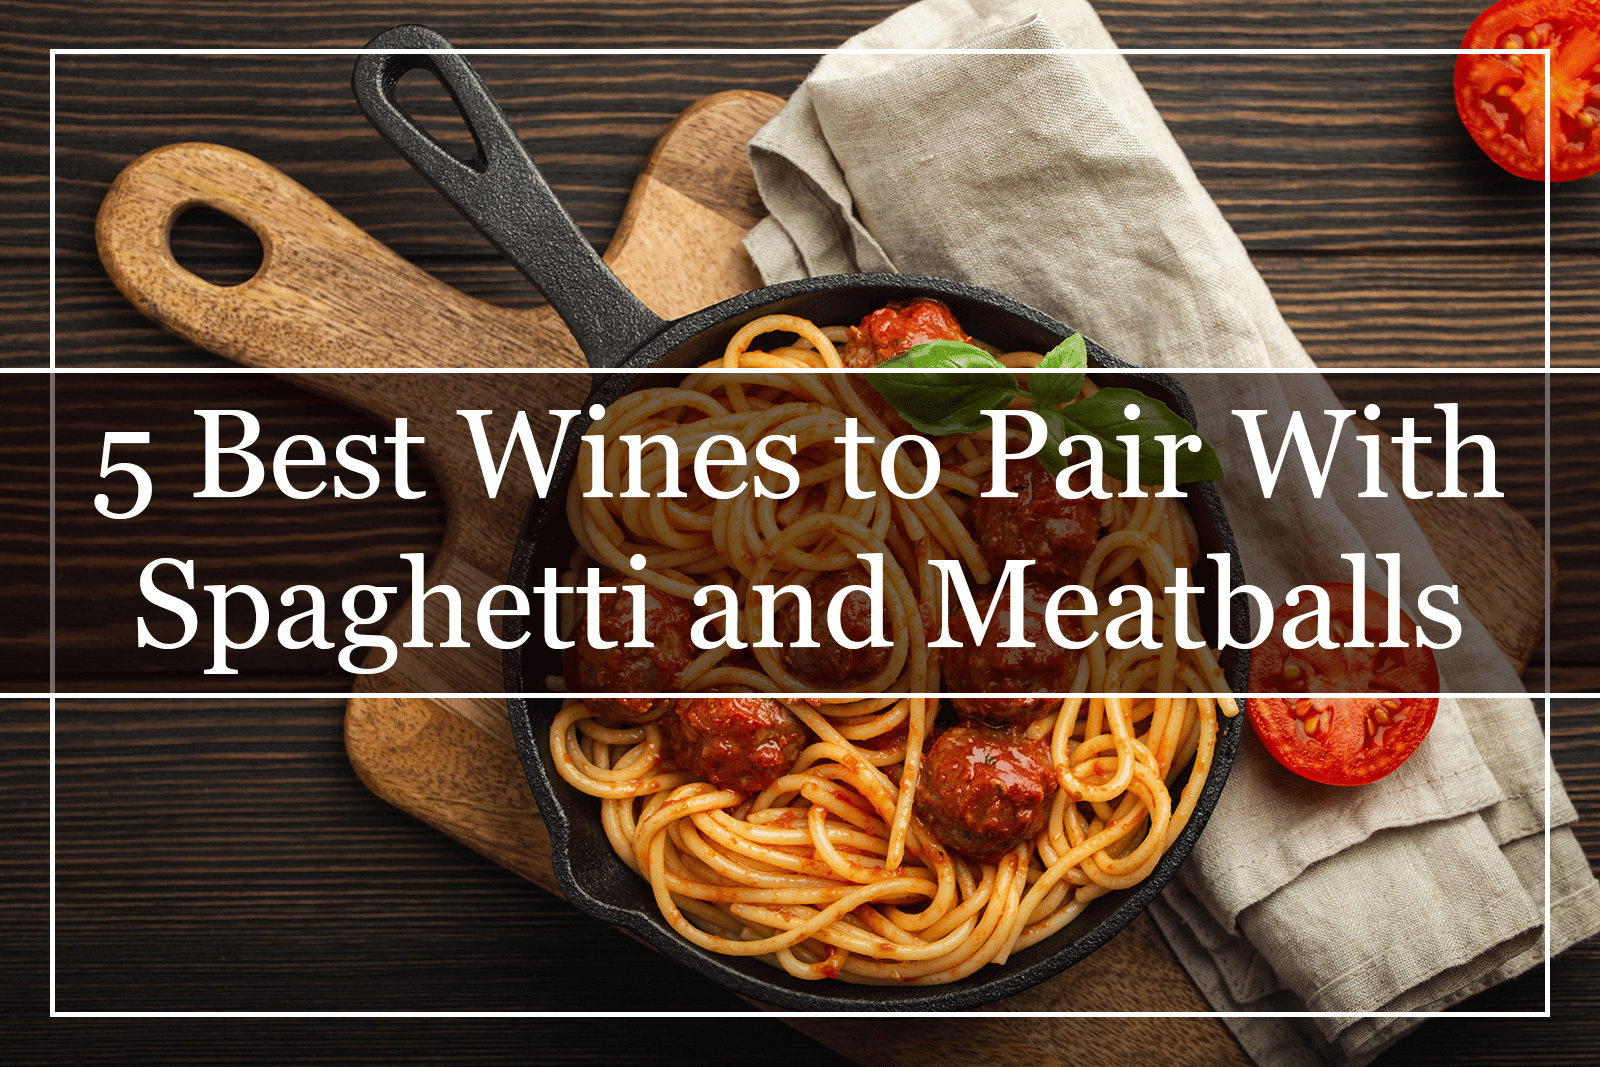 5 Best Wines to Pair With Spaghetti and Meatballs (2022)